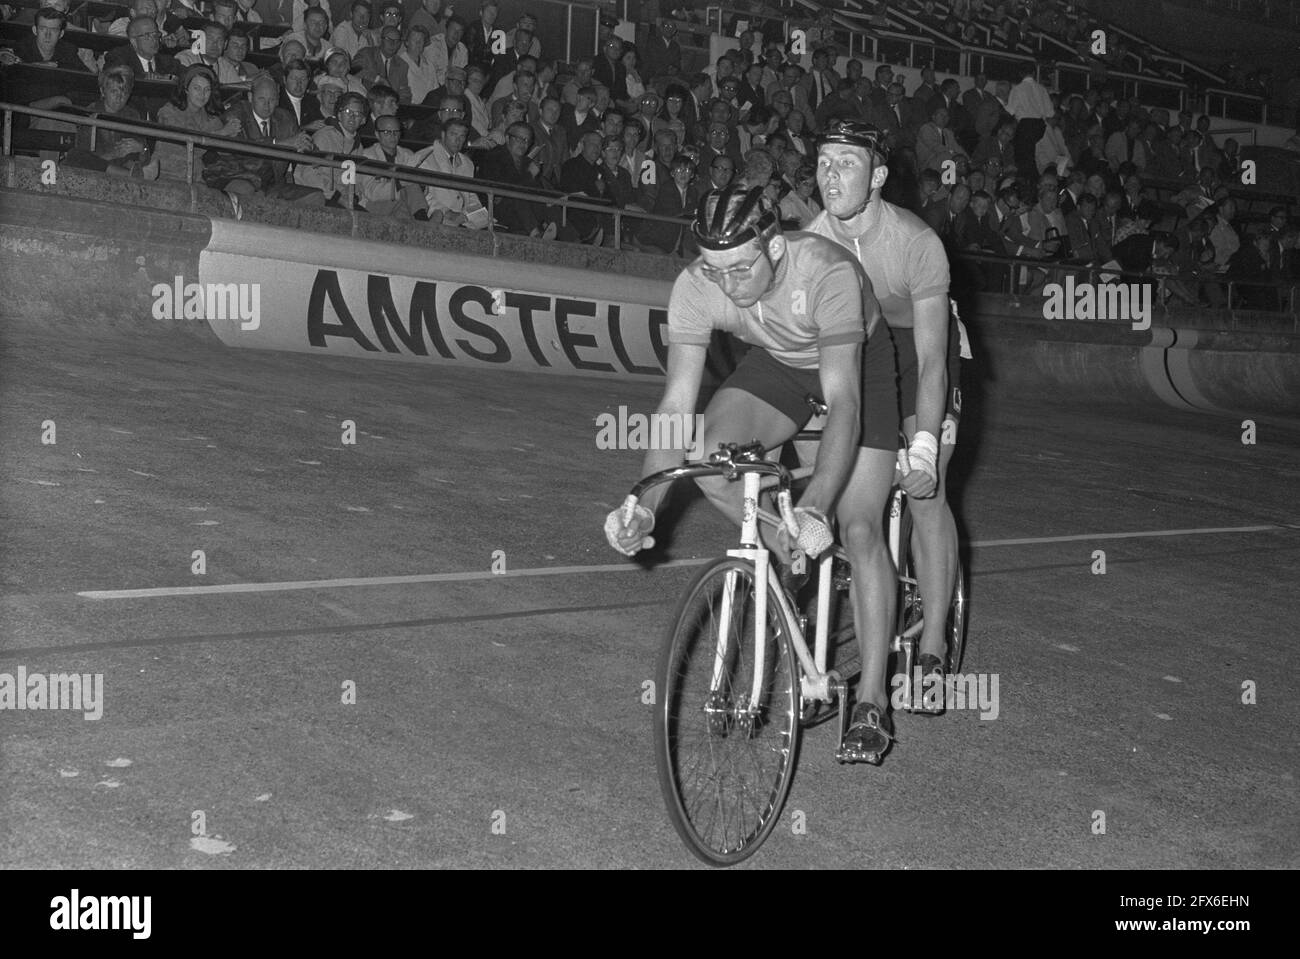 The tandem couple Jansen/Loevesijn in action, August 15, 1968, track cycling, The Netherlands, 20th century press agency photo, news to remember, documentary, historic photography 1945-1990, visual stories, human history of the Twentieth Century, capturing moments in time Stock Photo